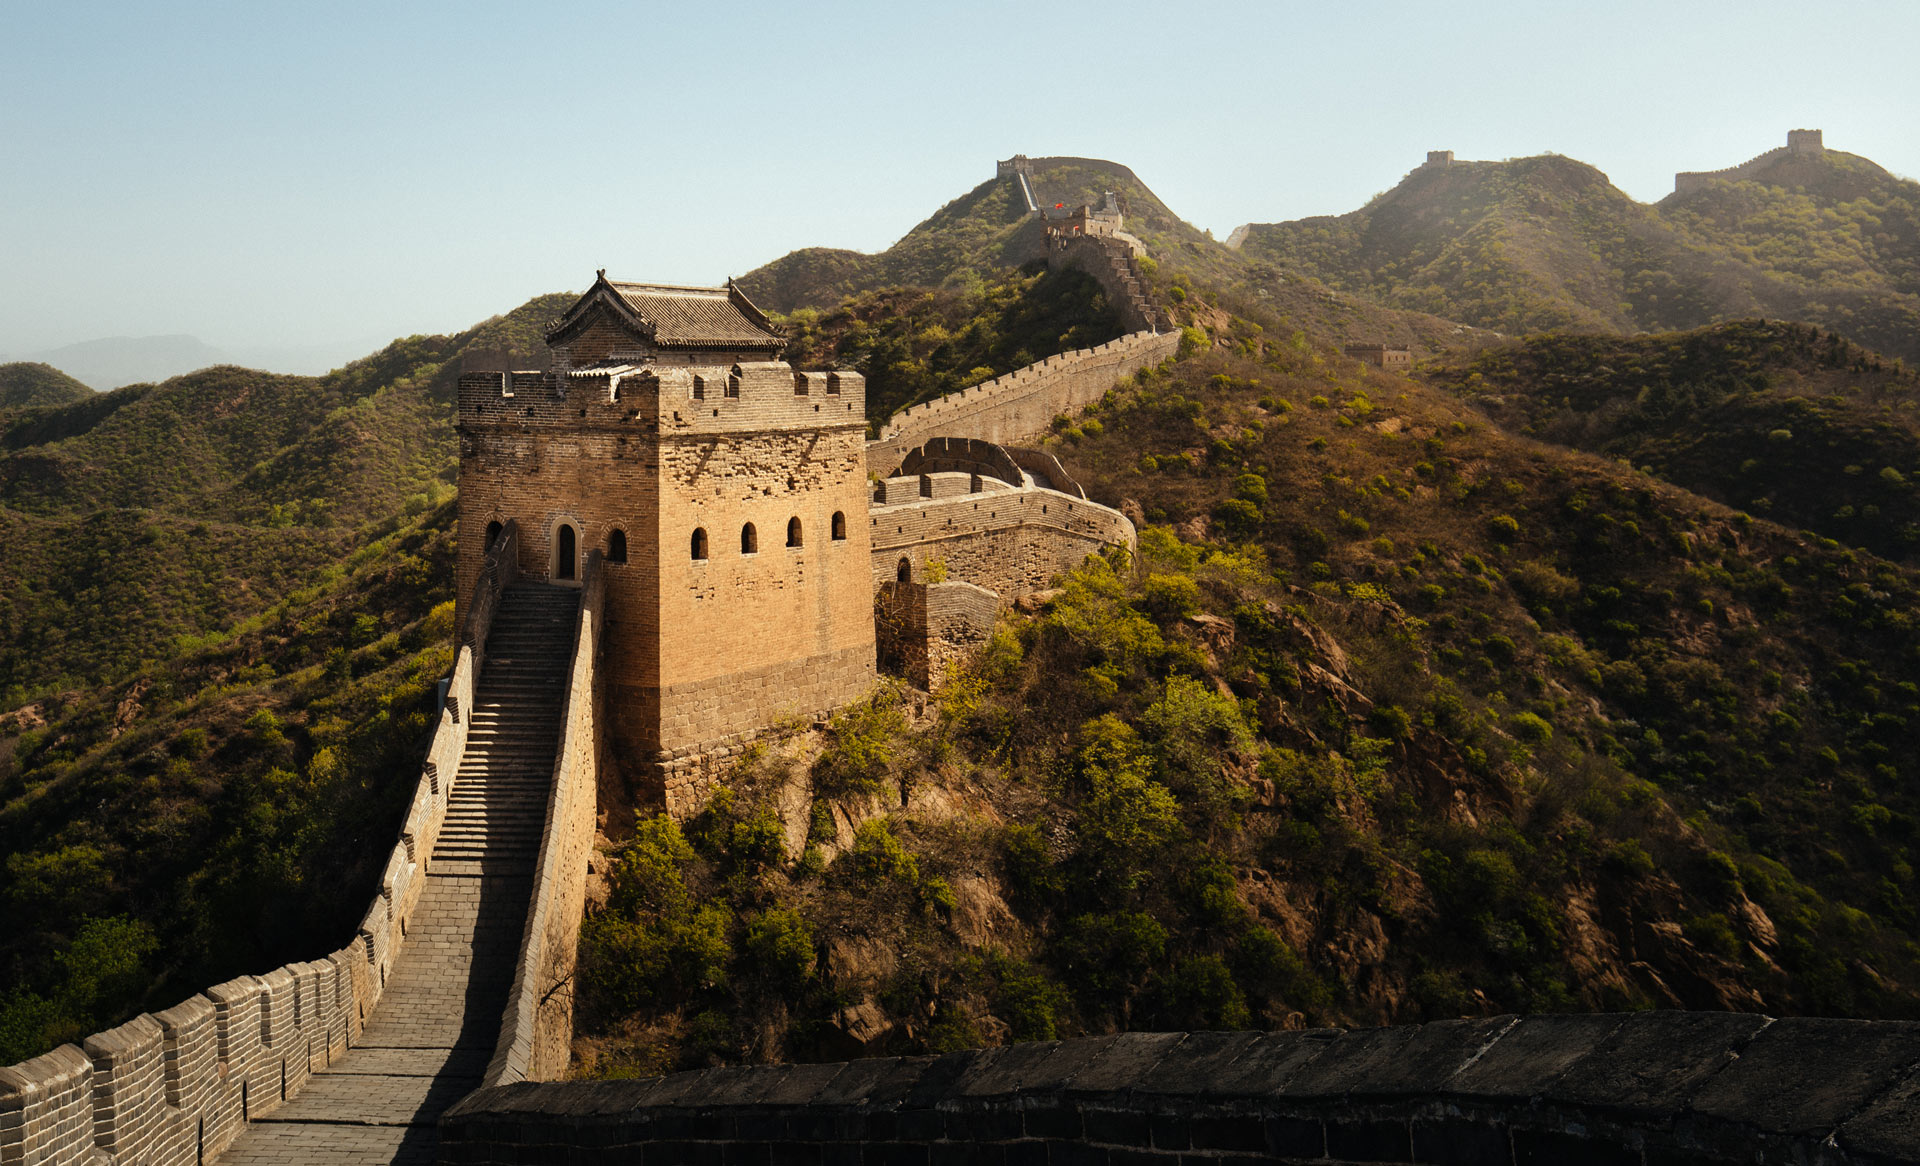 Great Wall of China - 10 days in China itinerary - best things to do